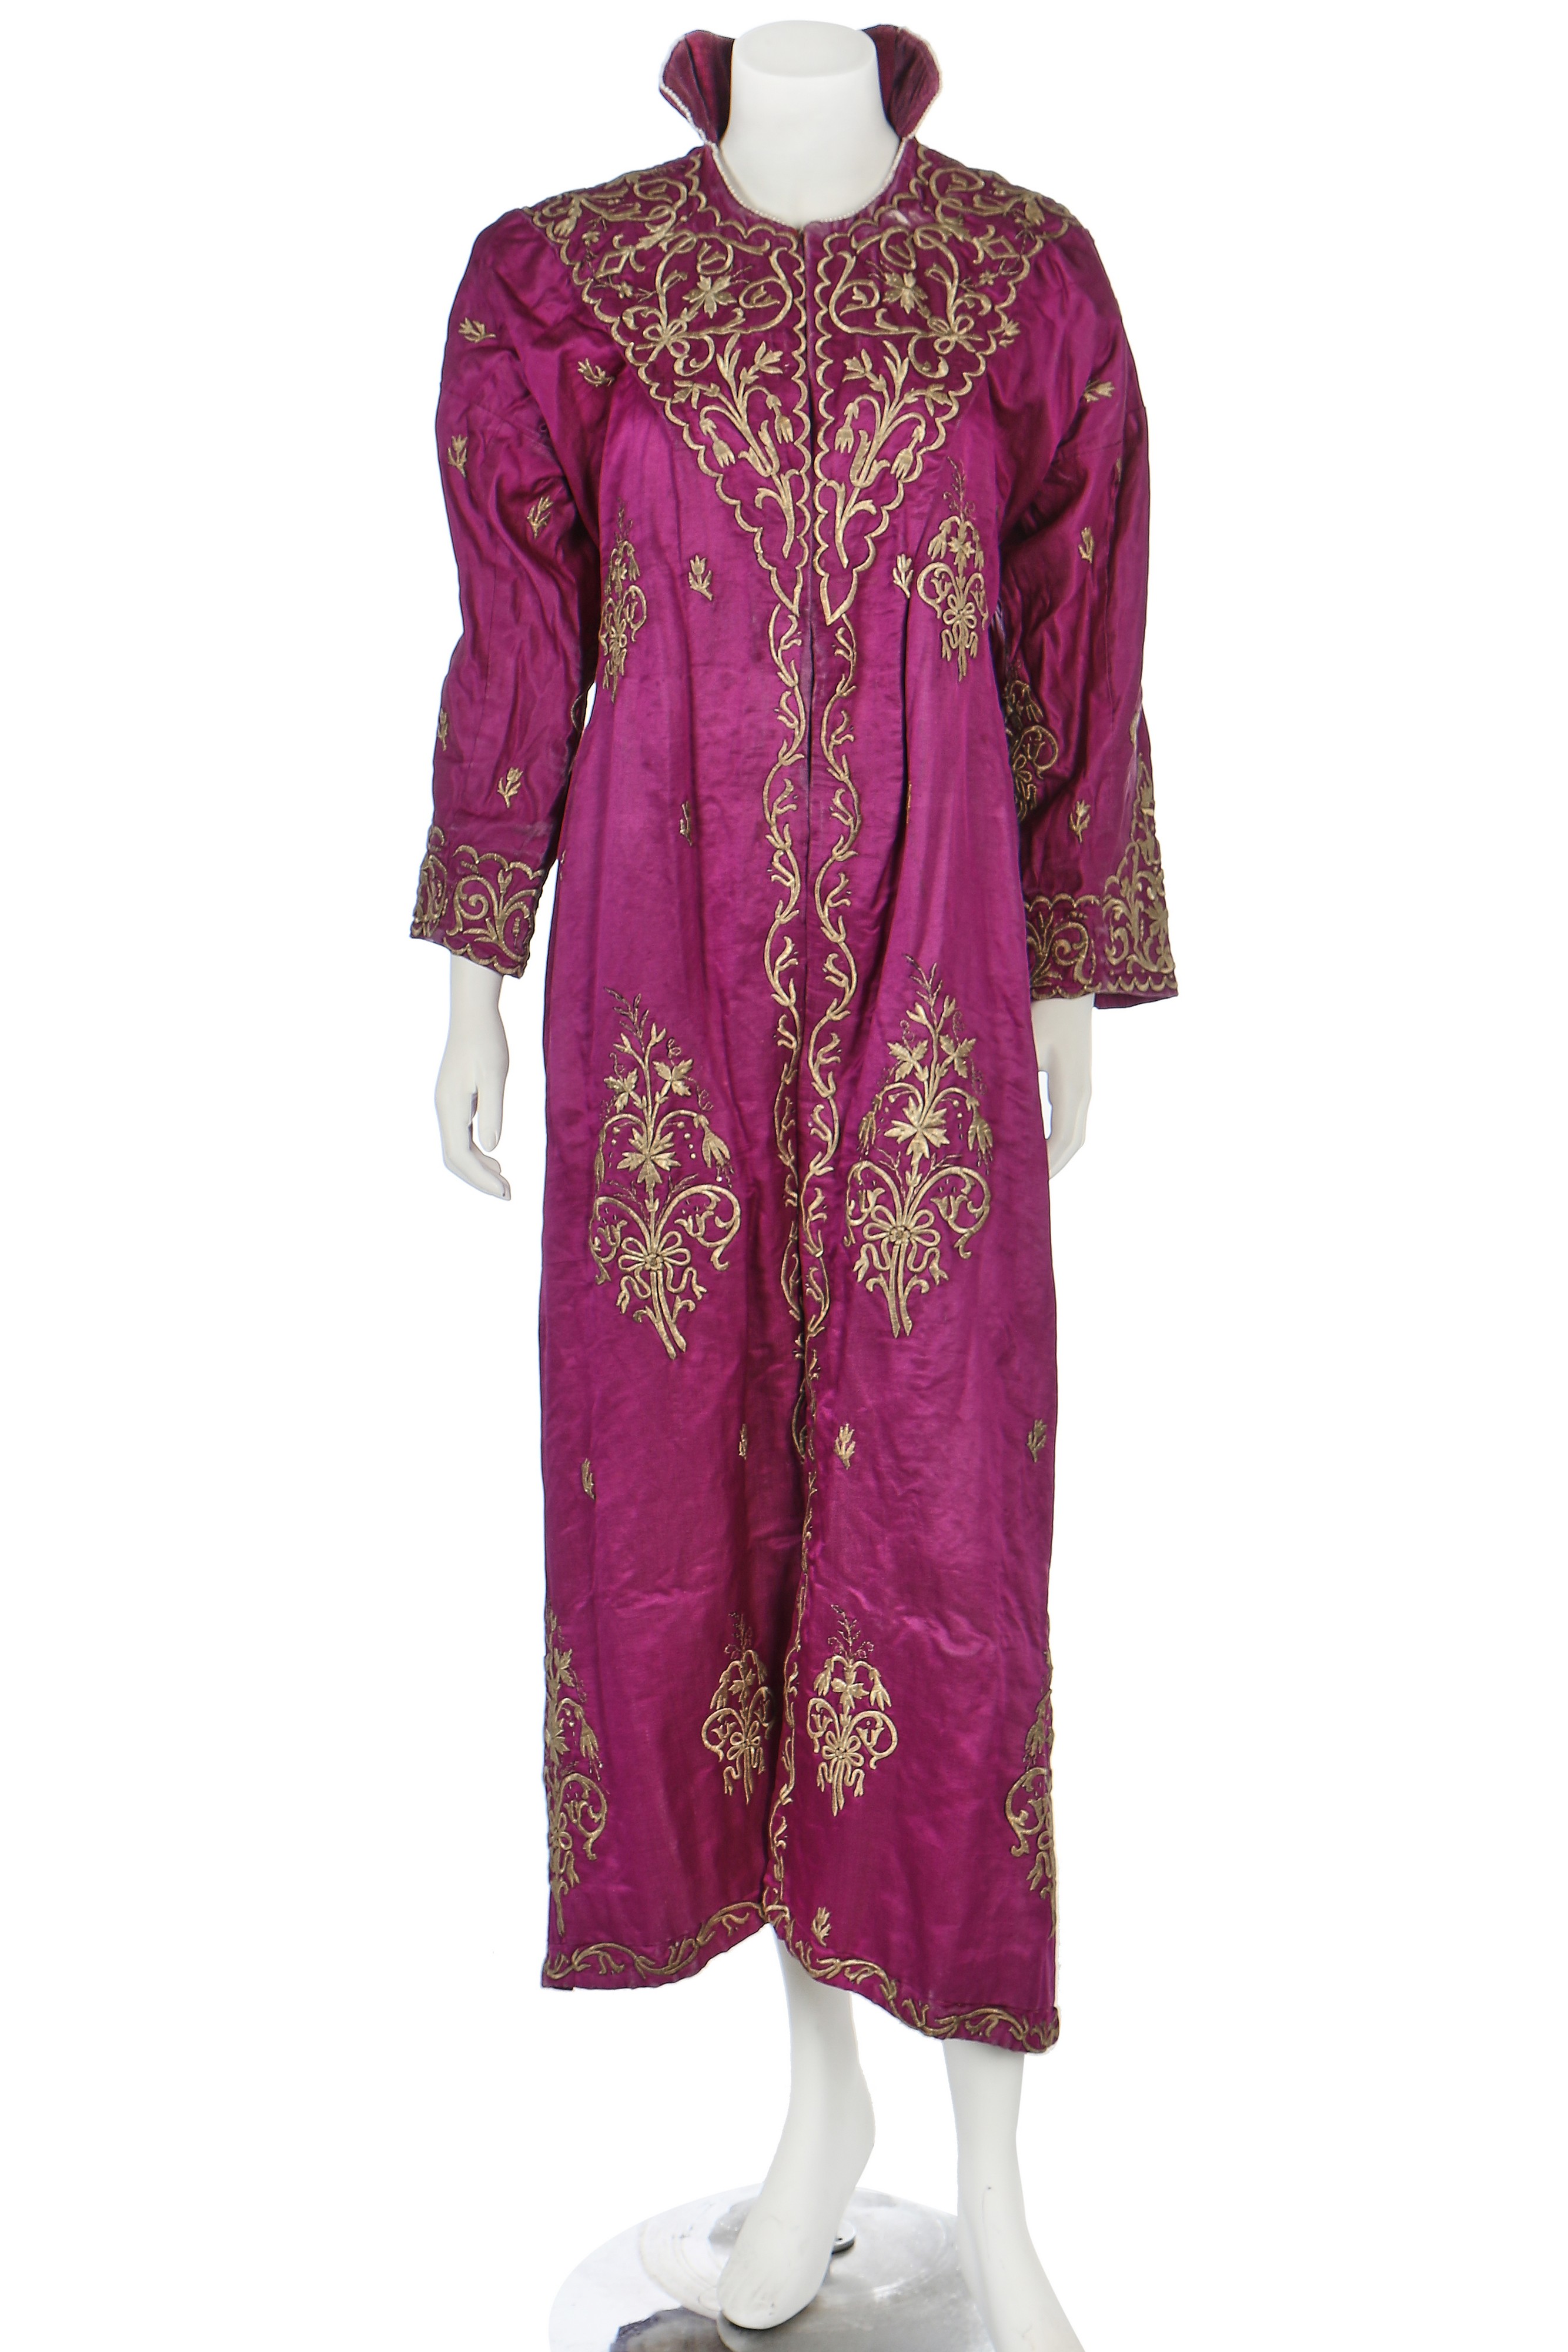 Lot 293 - A purple satin robe adorned with arabesques